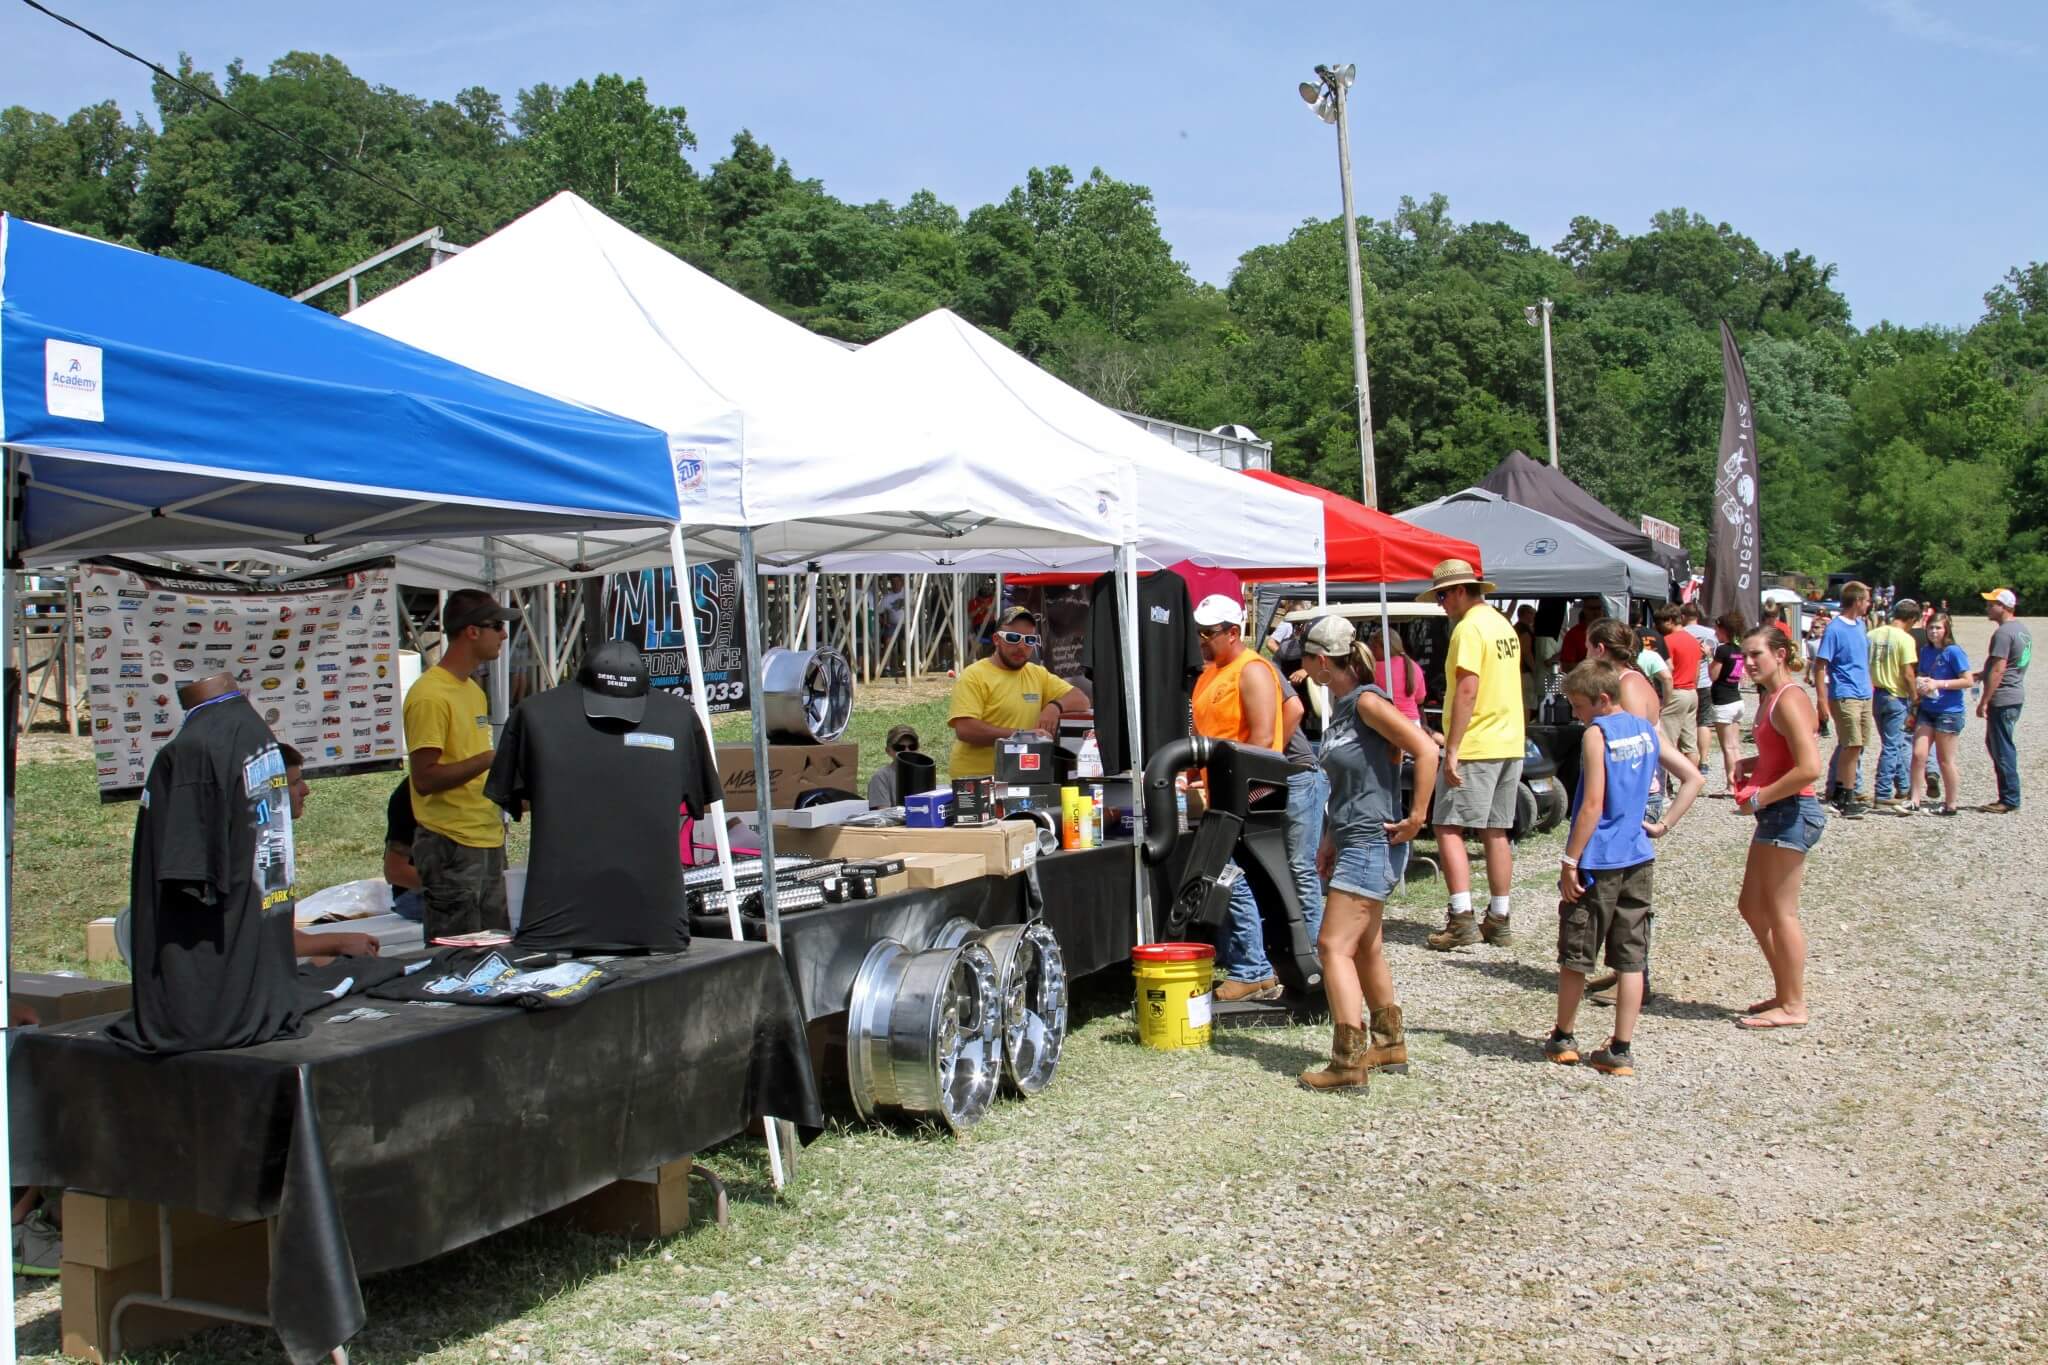 The vendor display area was directly behind the track's main grandstands. Spectators had the opportunity to purchase anything from shirts to performance parts at show special pricing.